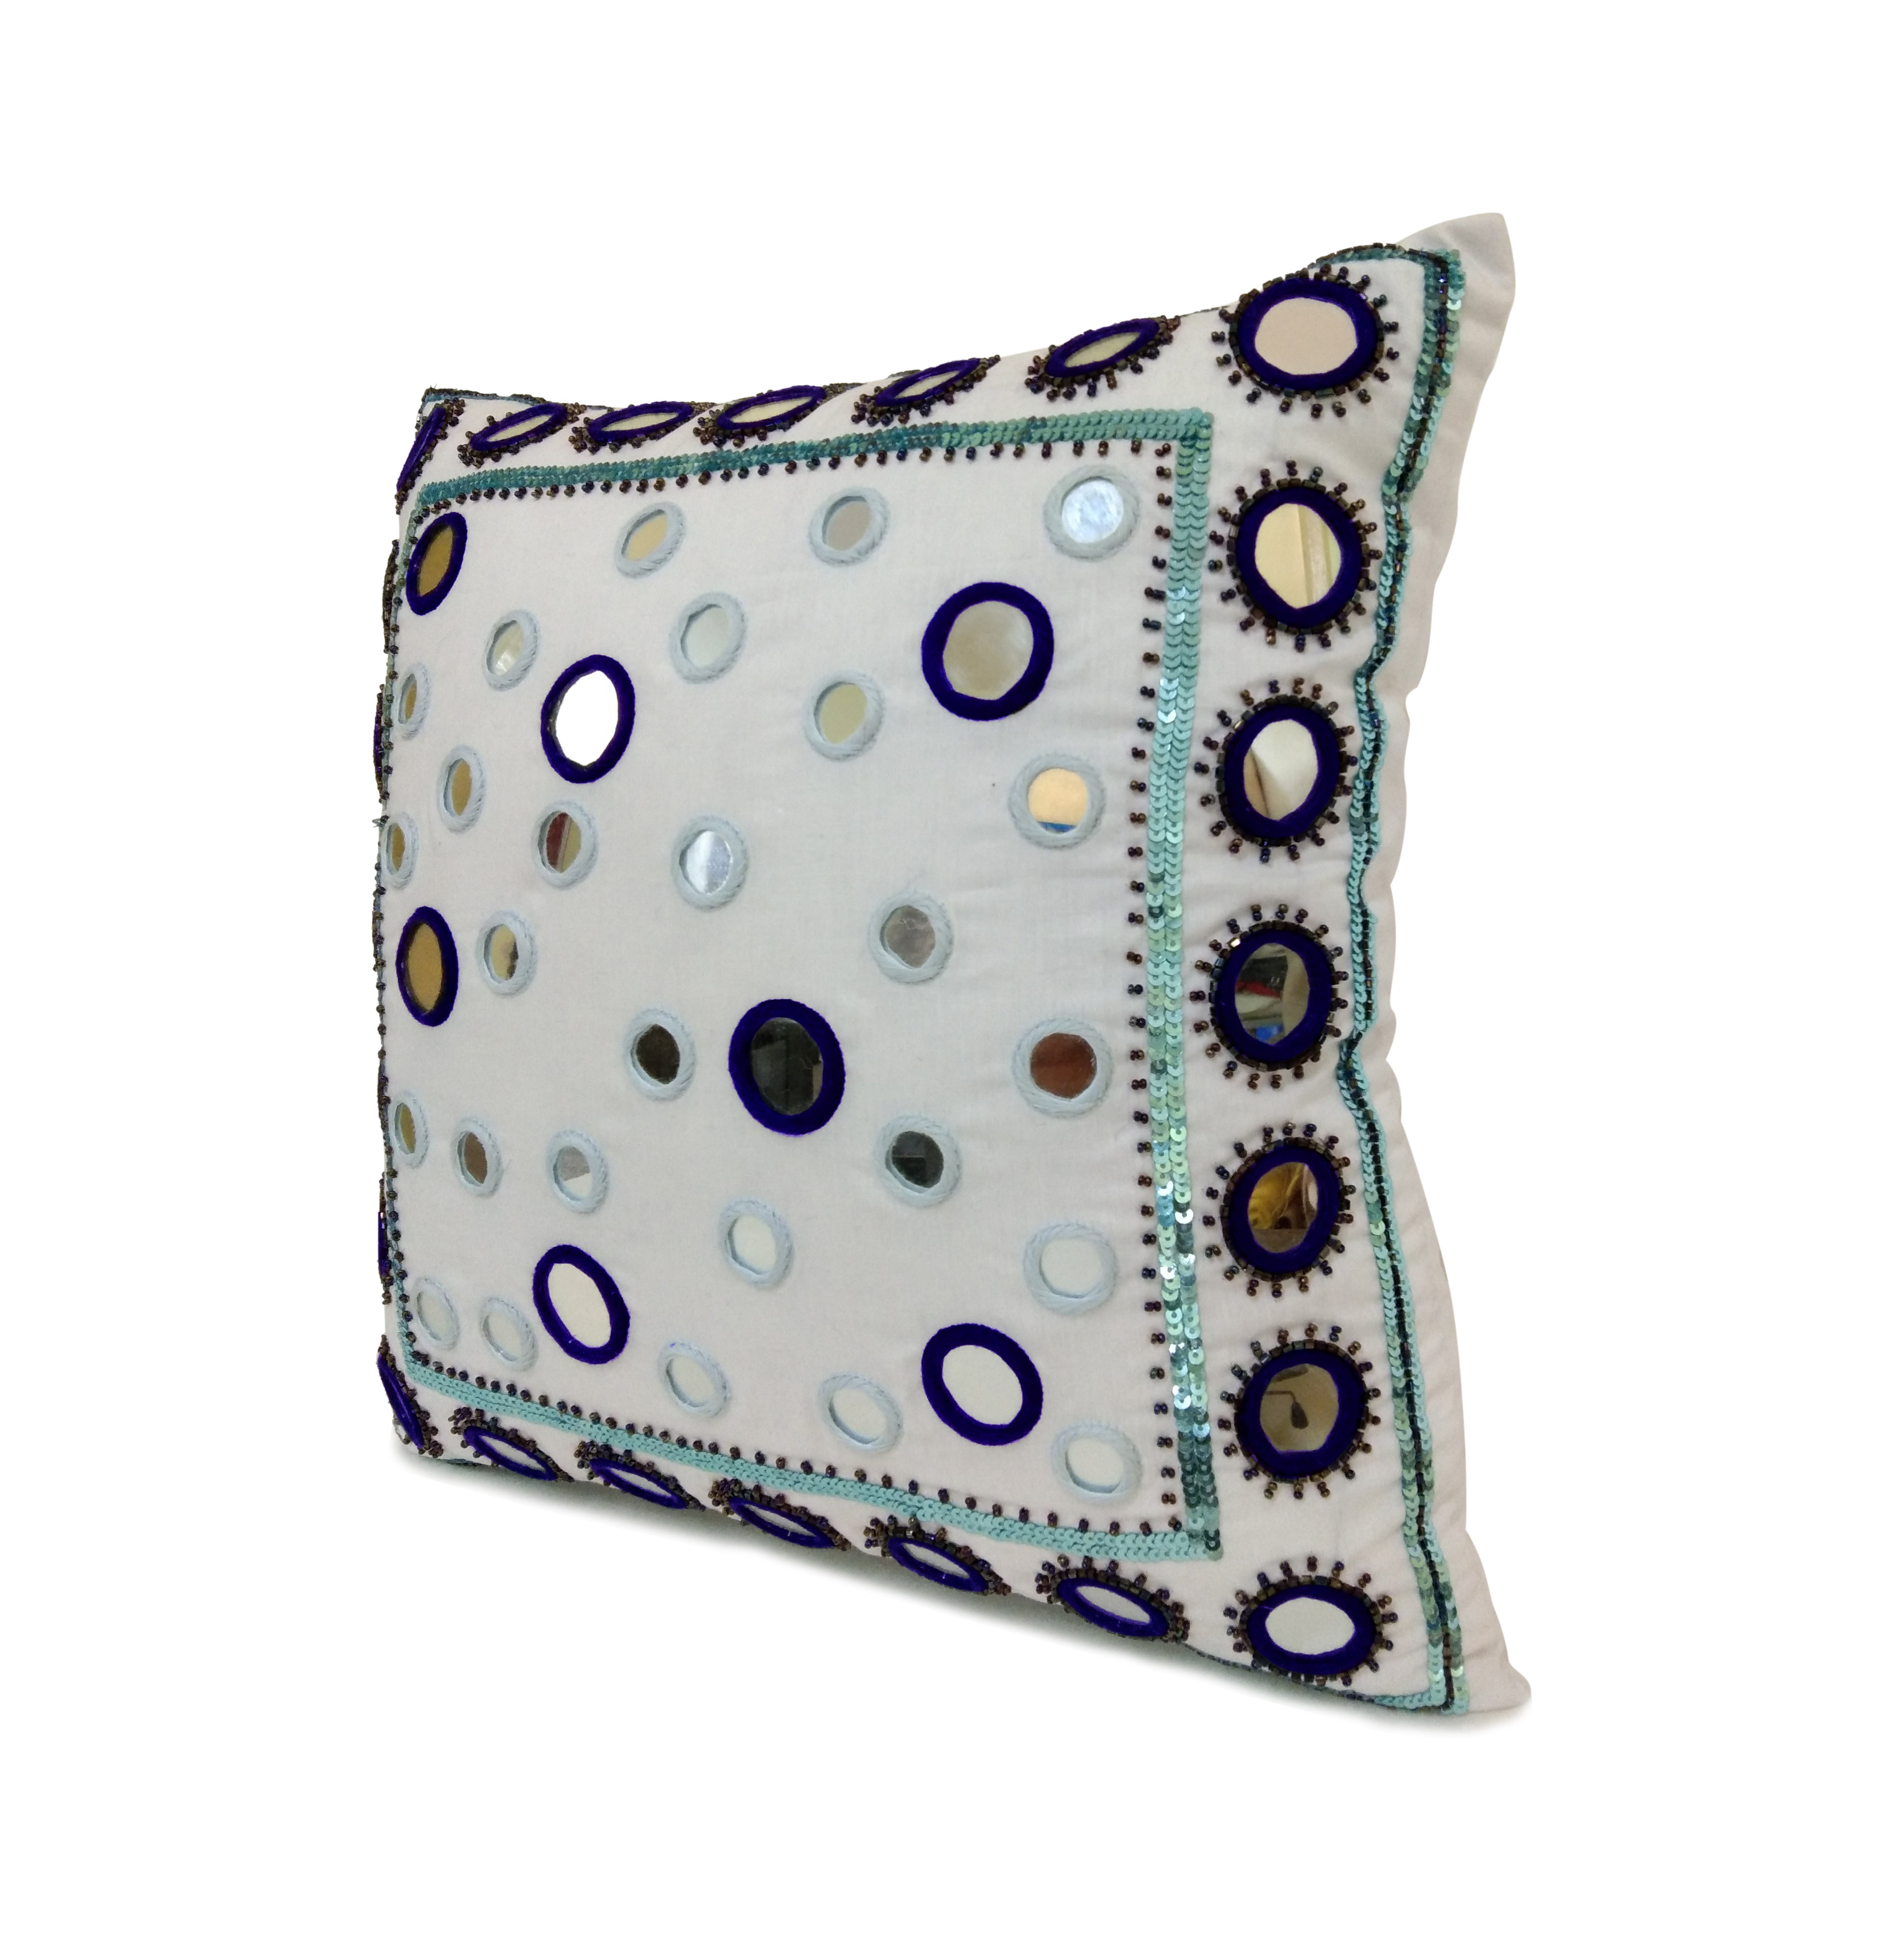 Amore Beaute Mirror Pillow Cover in Blues